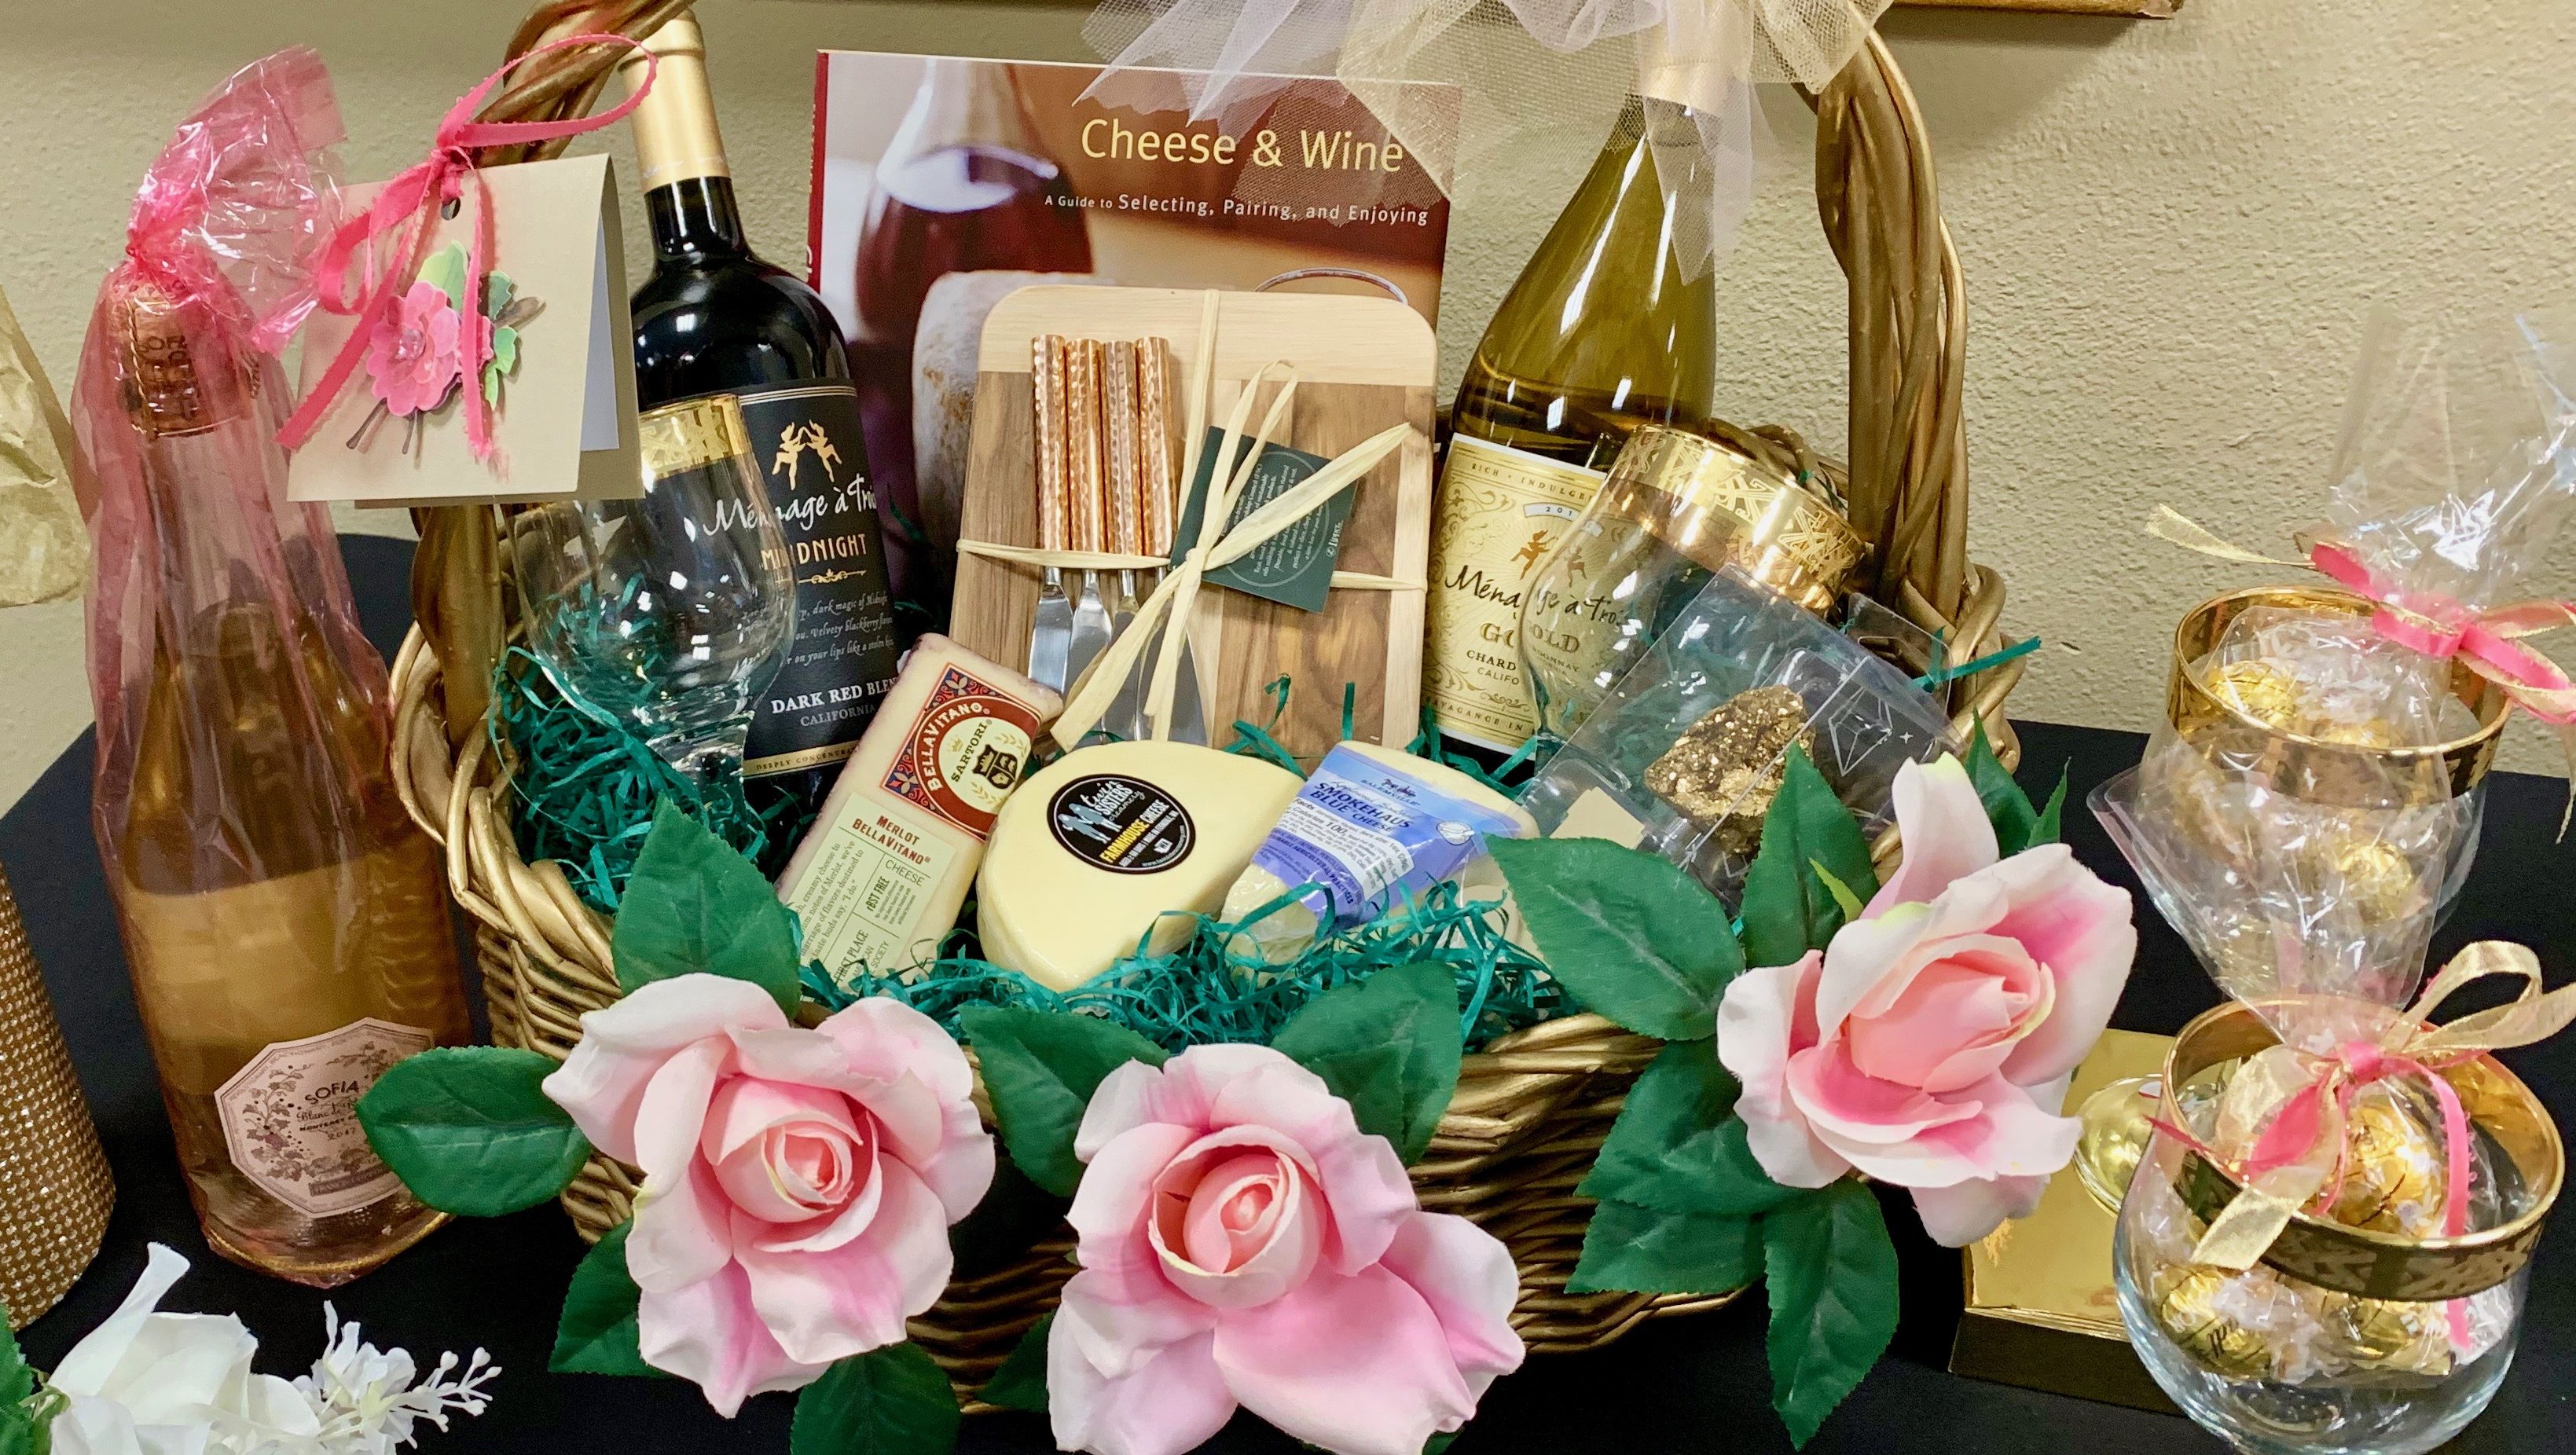 Win fabulous luxury gift baskets at our Fashion Event!